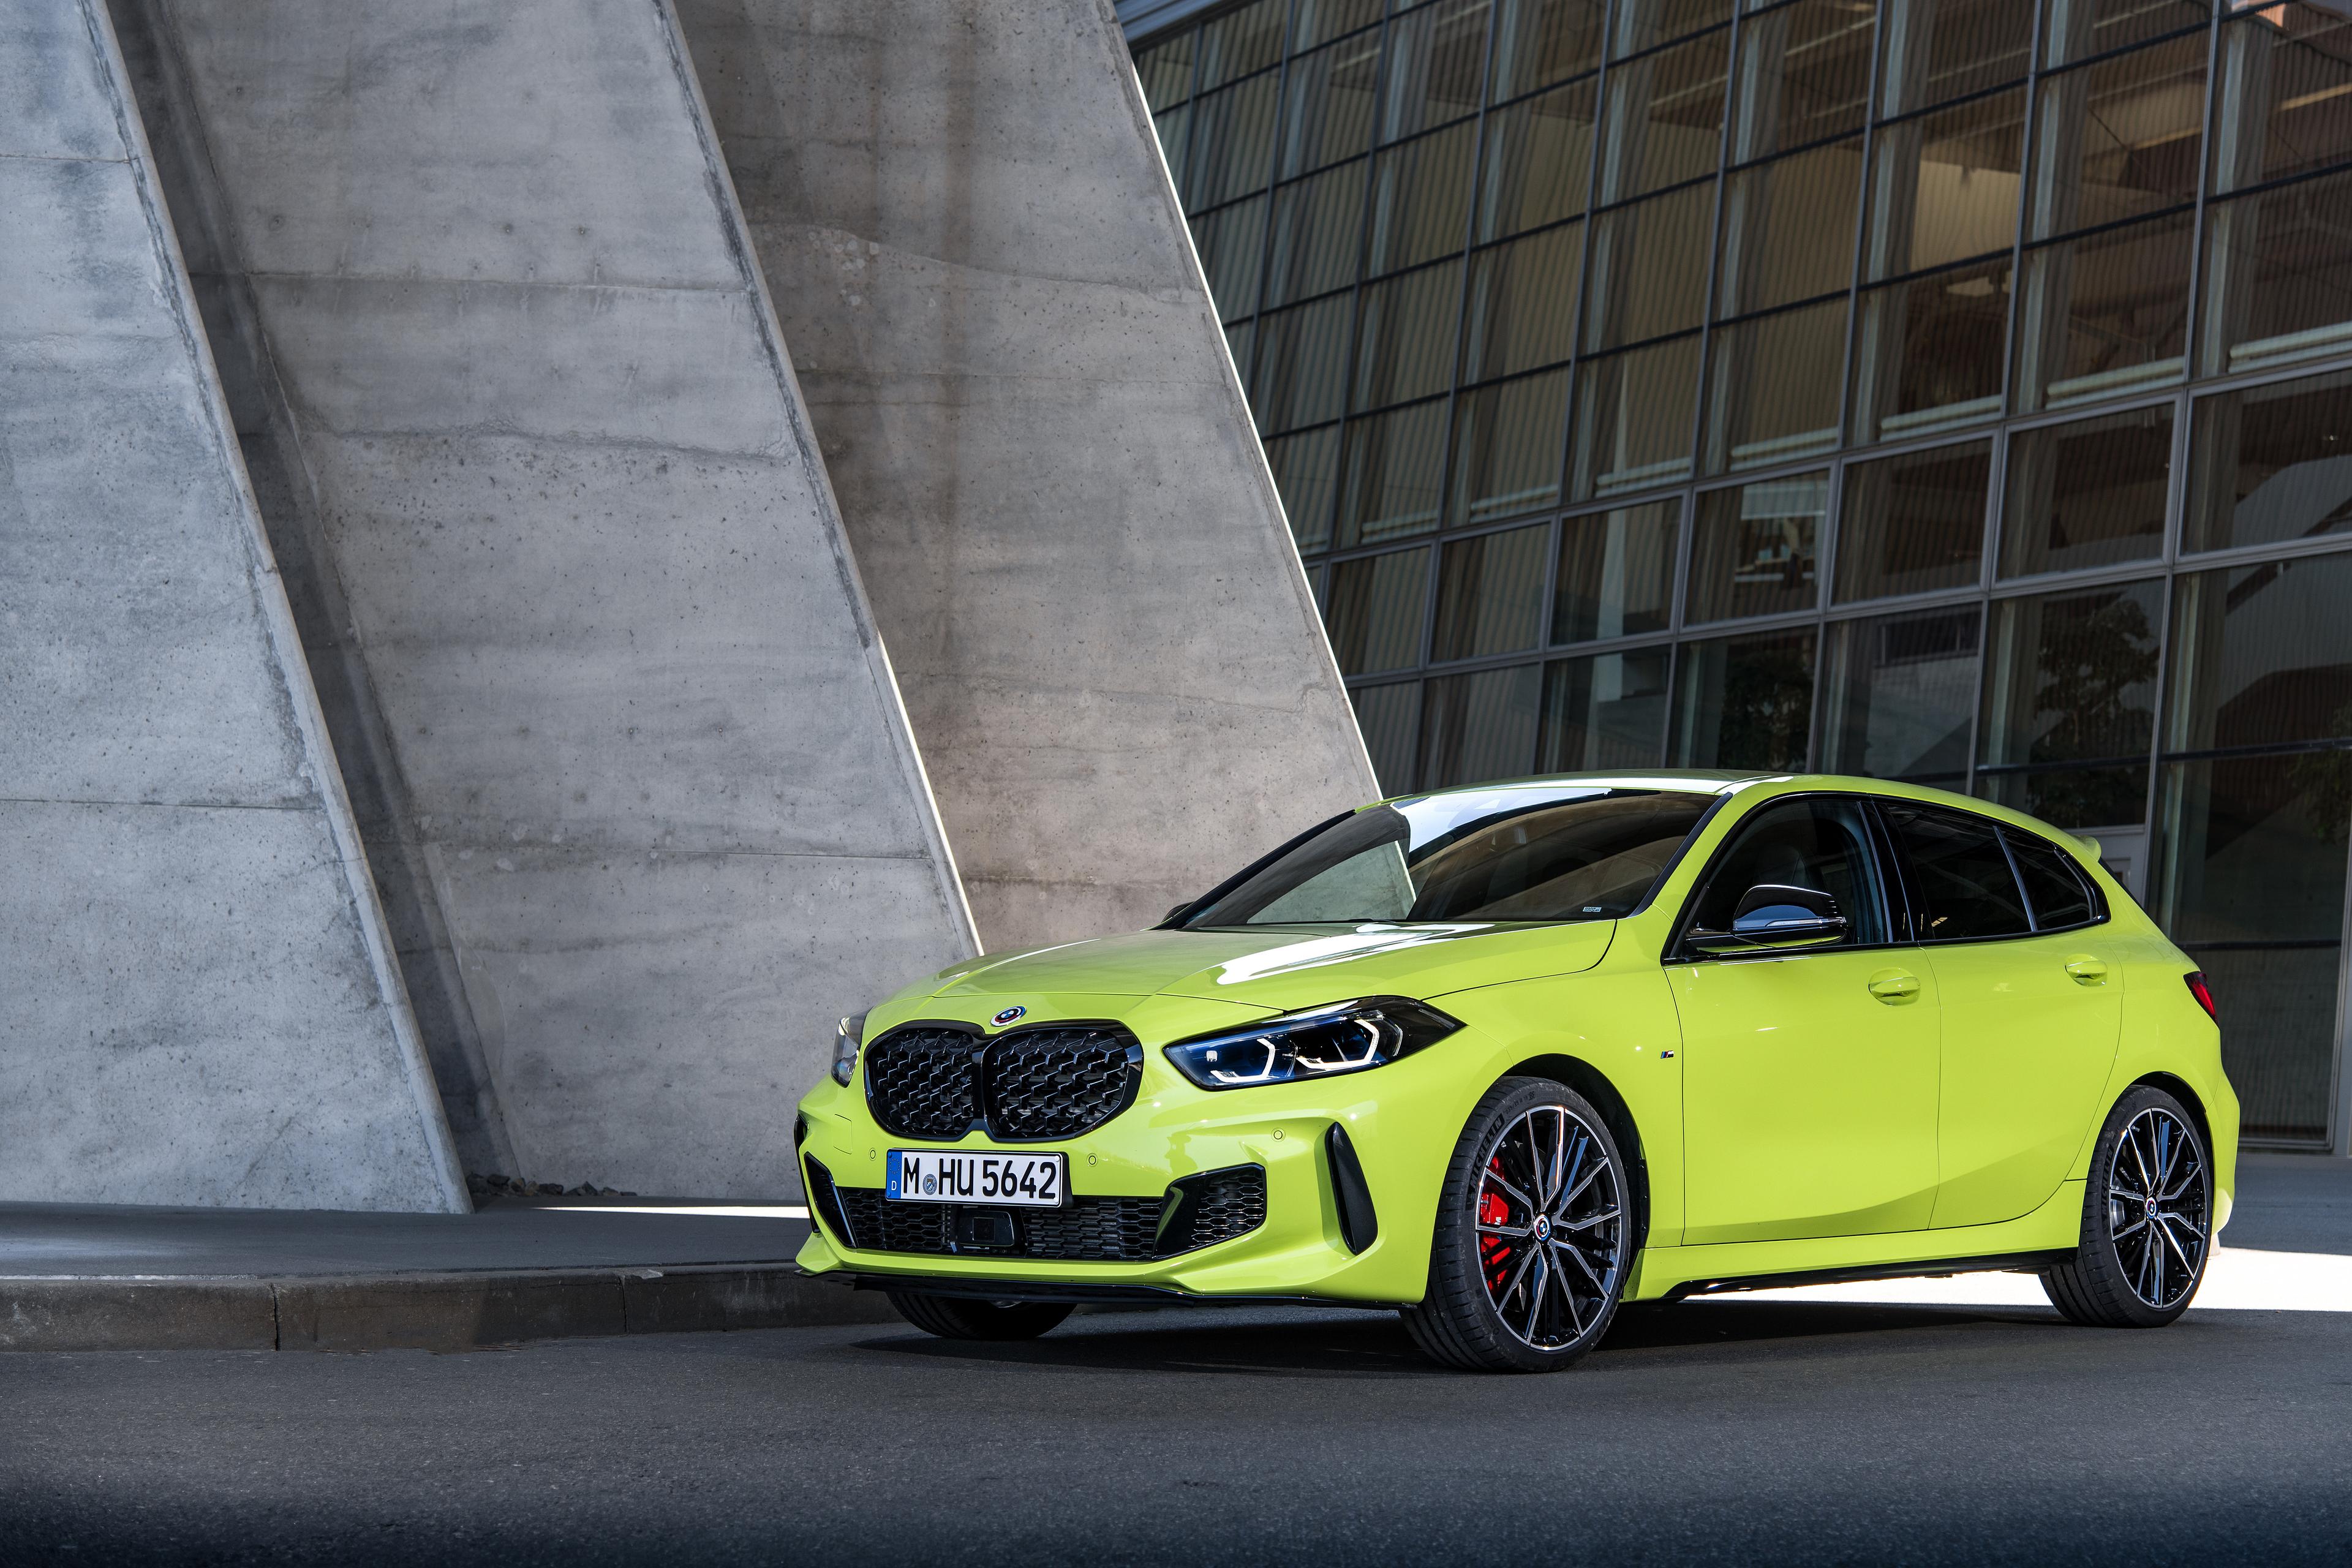 A yellow BMW 1 Series M135i model parked next to a large stone and glass building